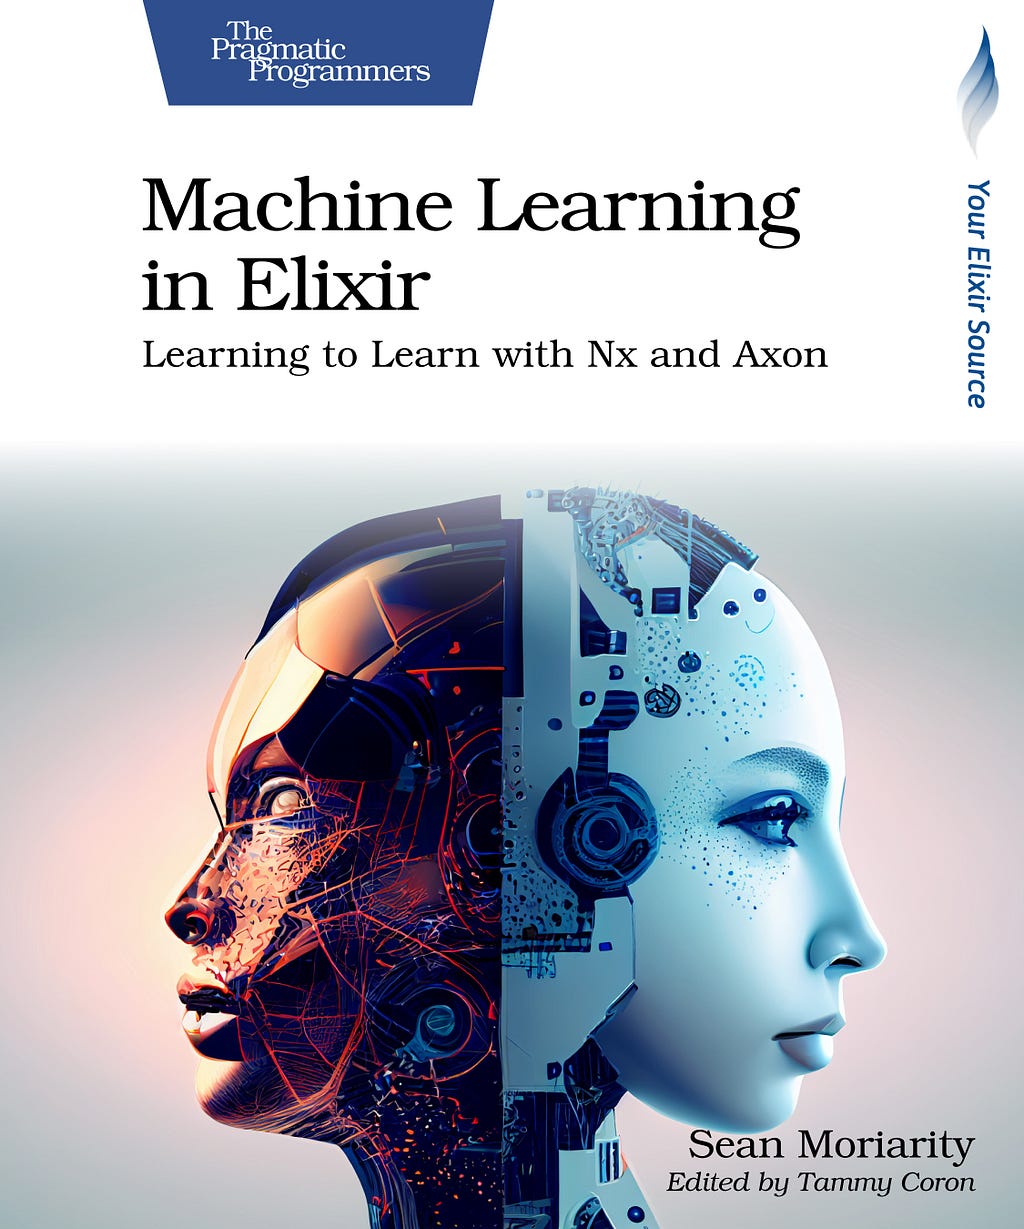 Cover for Machine Learning in Elixir by Sean Moriarity featuring two robotic faces back to back, one blue, one brown, both with feminine features